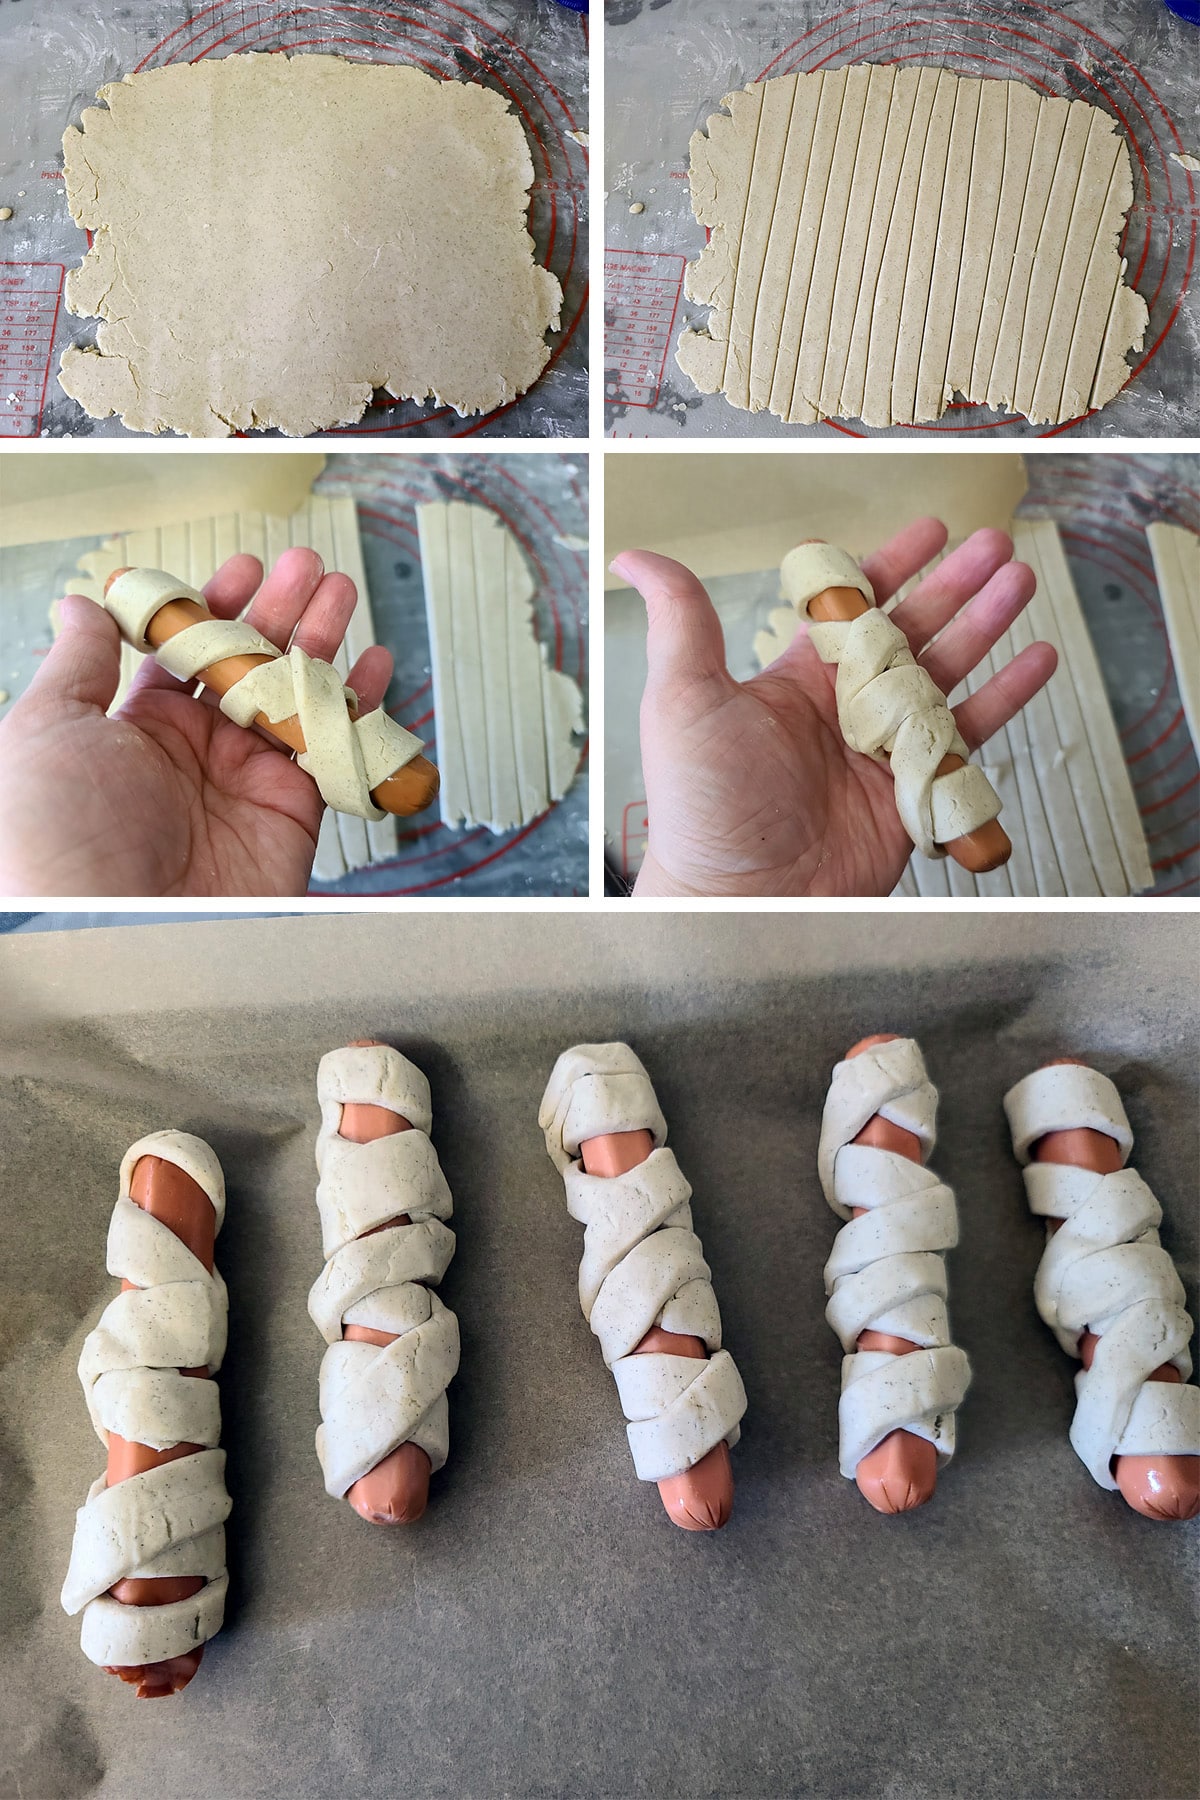 A 5 part image showing the dough being rolled out, cut in strips, and wrapped around weiners. 